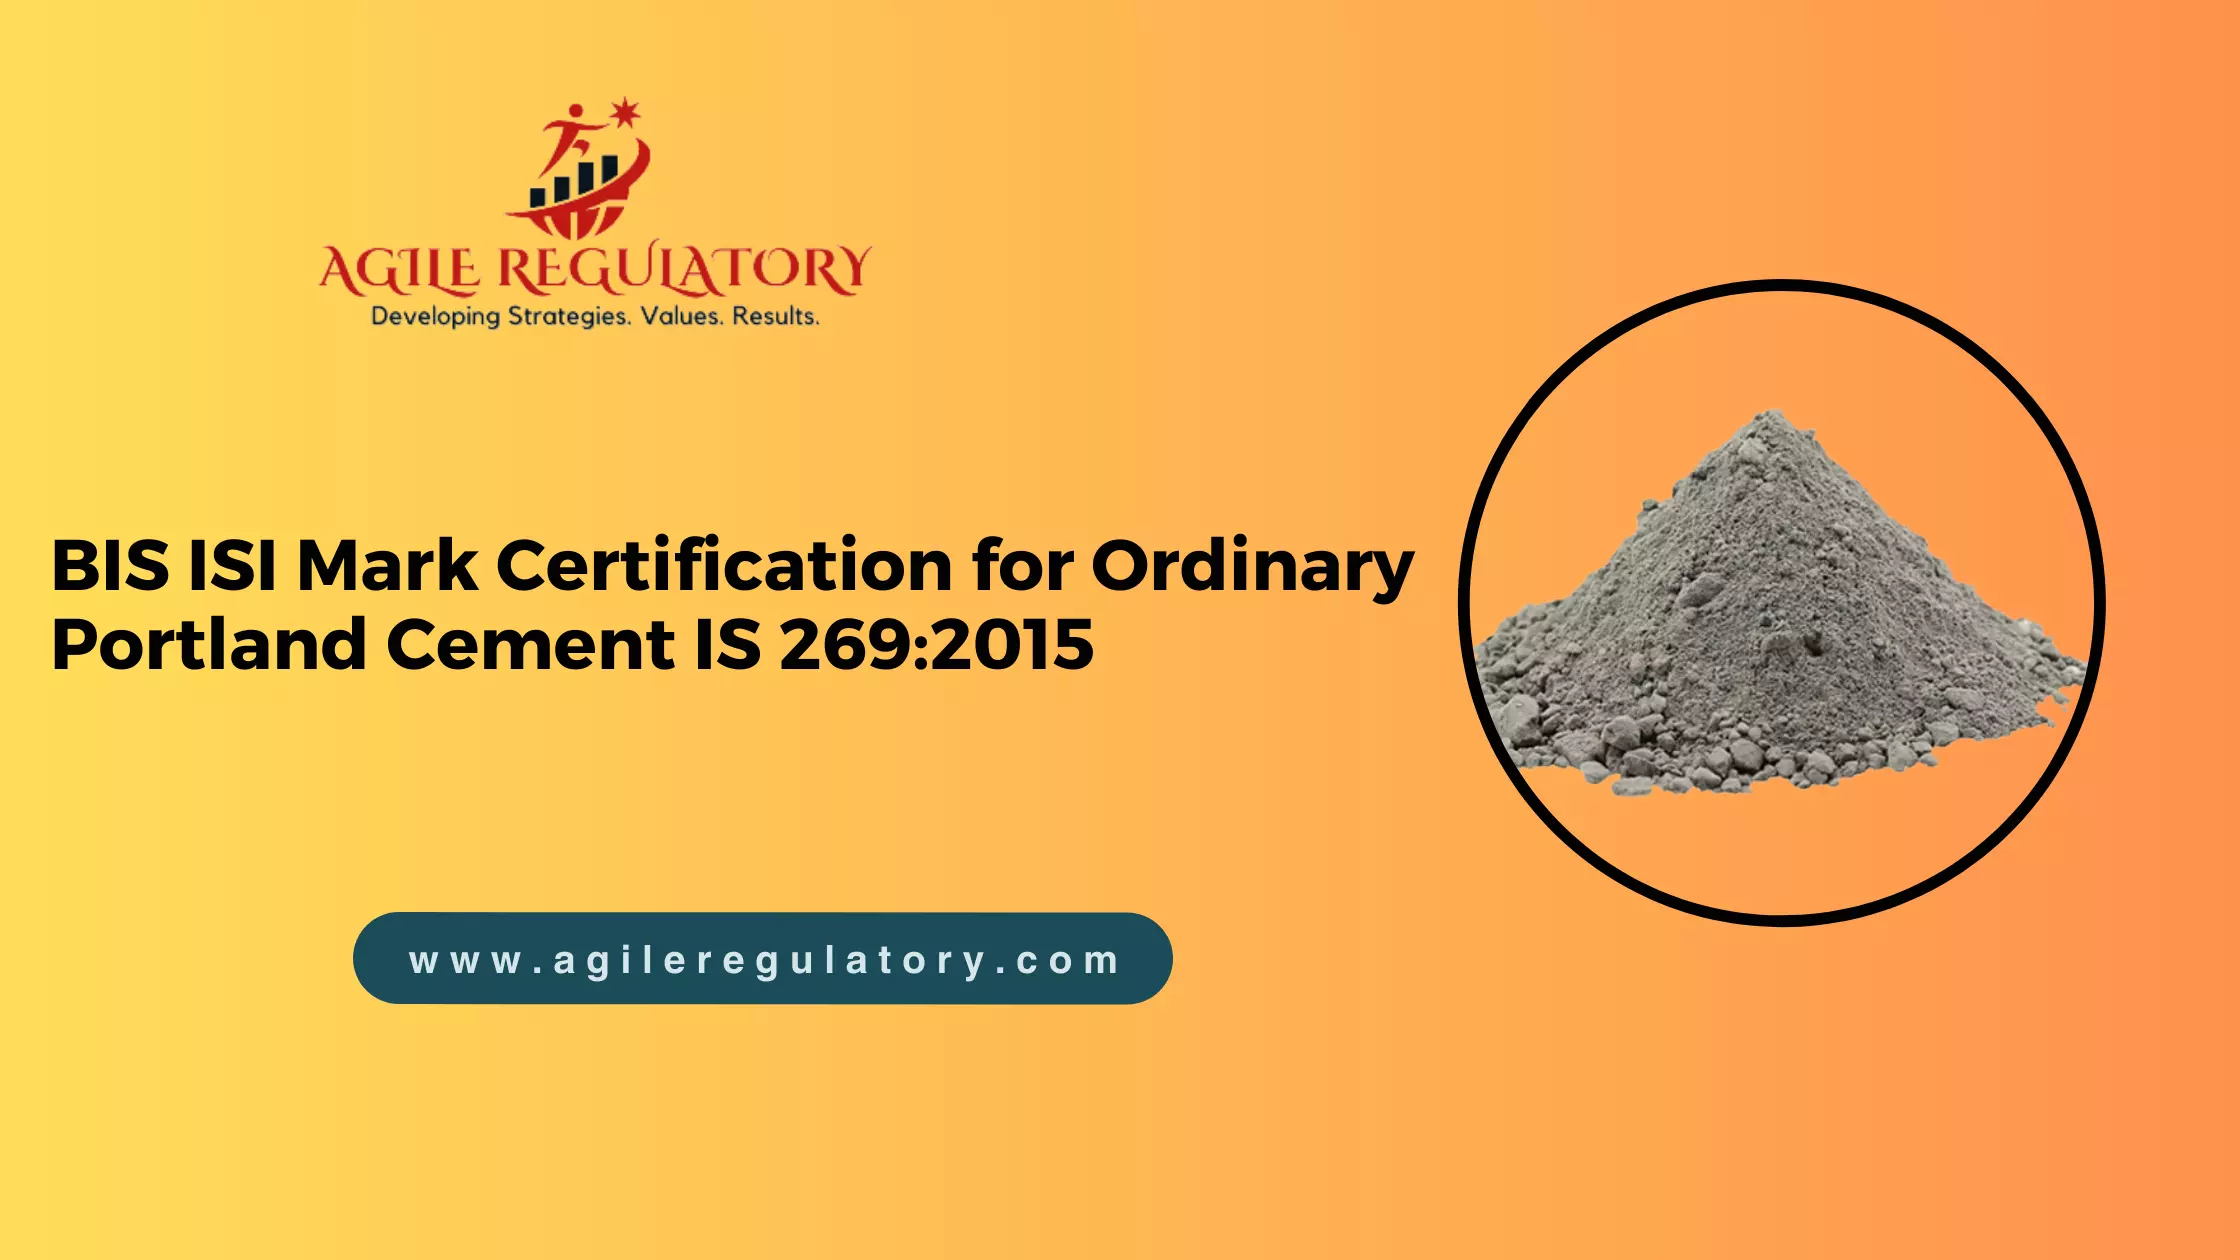 BIS ISI Mark Certification for Ordinary Portland Cement IS 269:2015